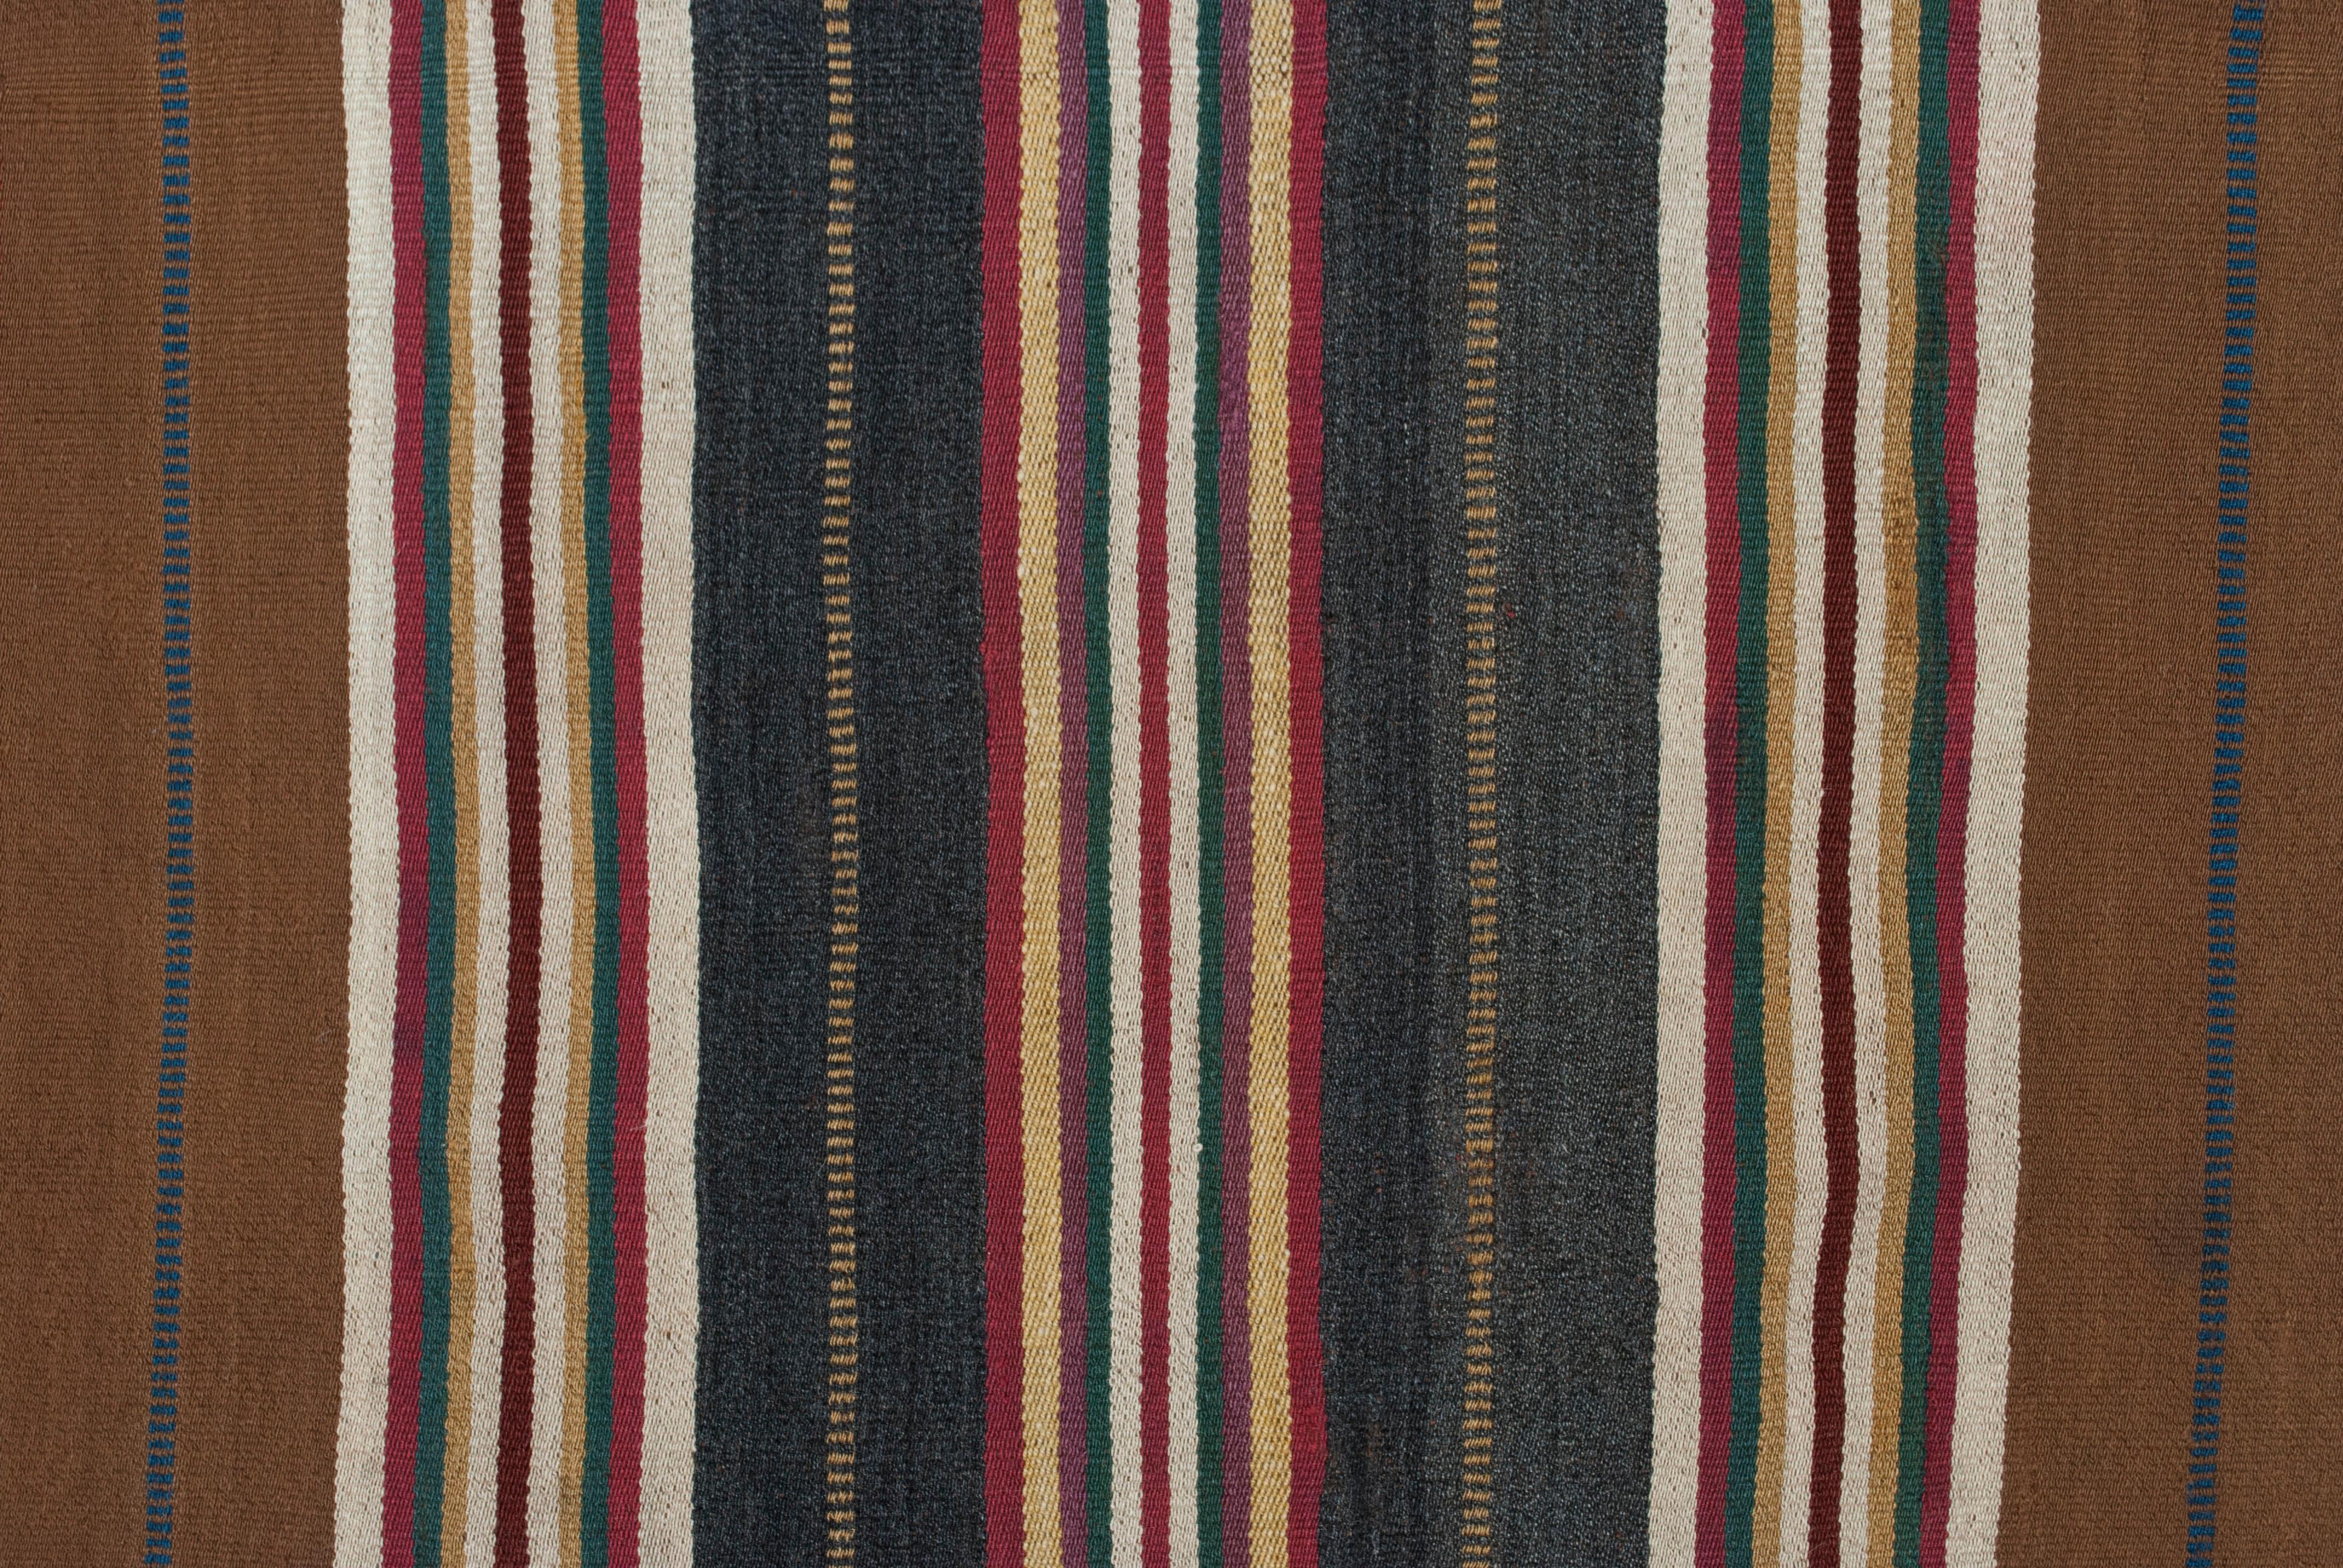 Early 20th century Aymara coca cloth / Tari, Dept. of La Paz, Bolivia

This small coca or tari cloth was traditionally used to hold and carry coca leaves and other foodstuffs, and was occasionally used as an offering cloth during specific